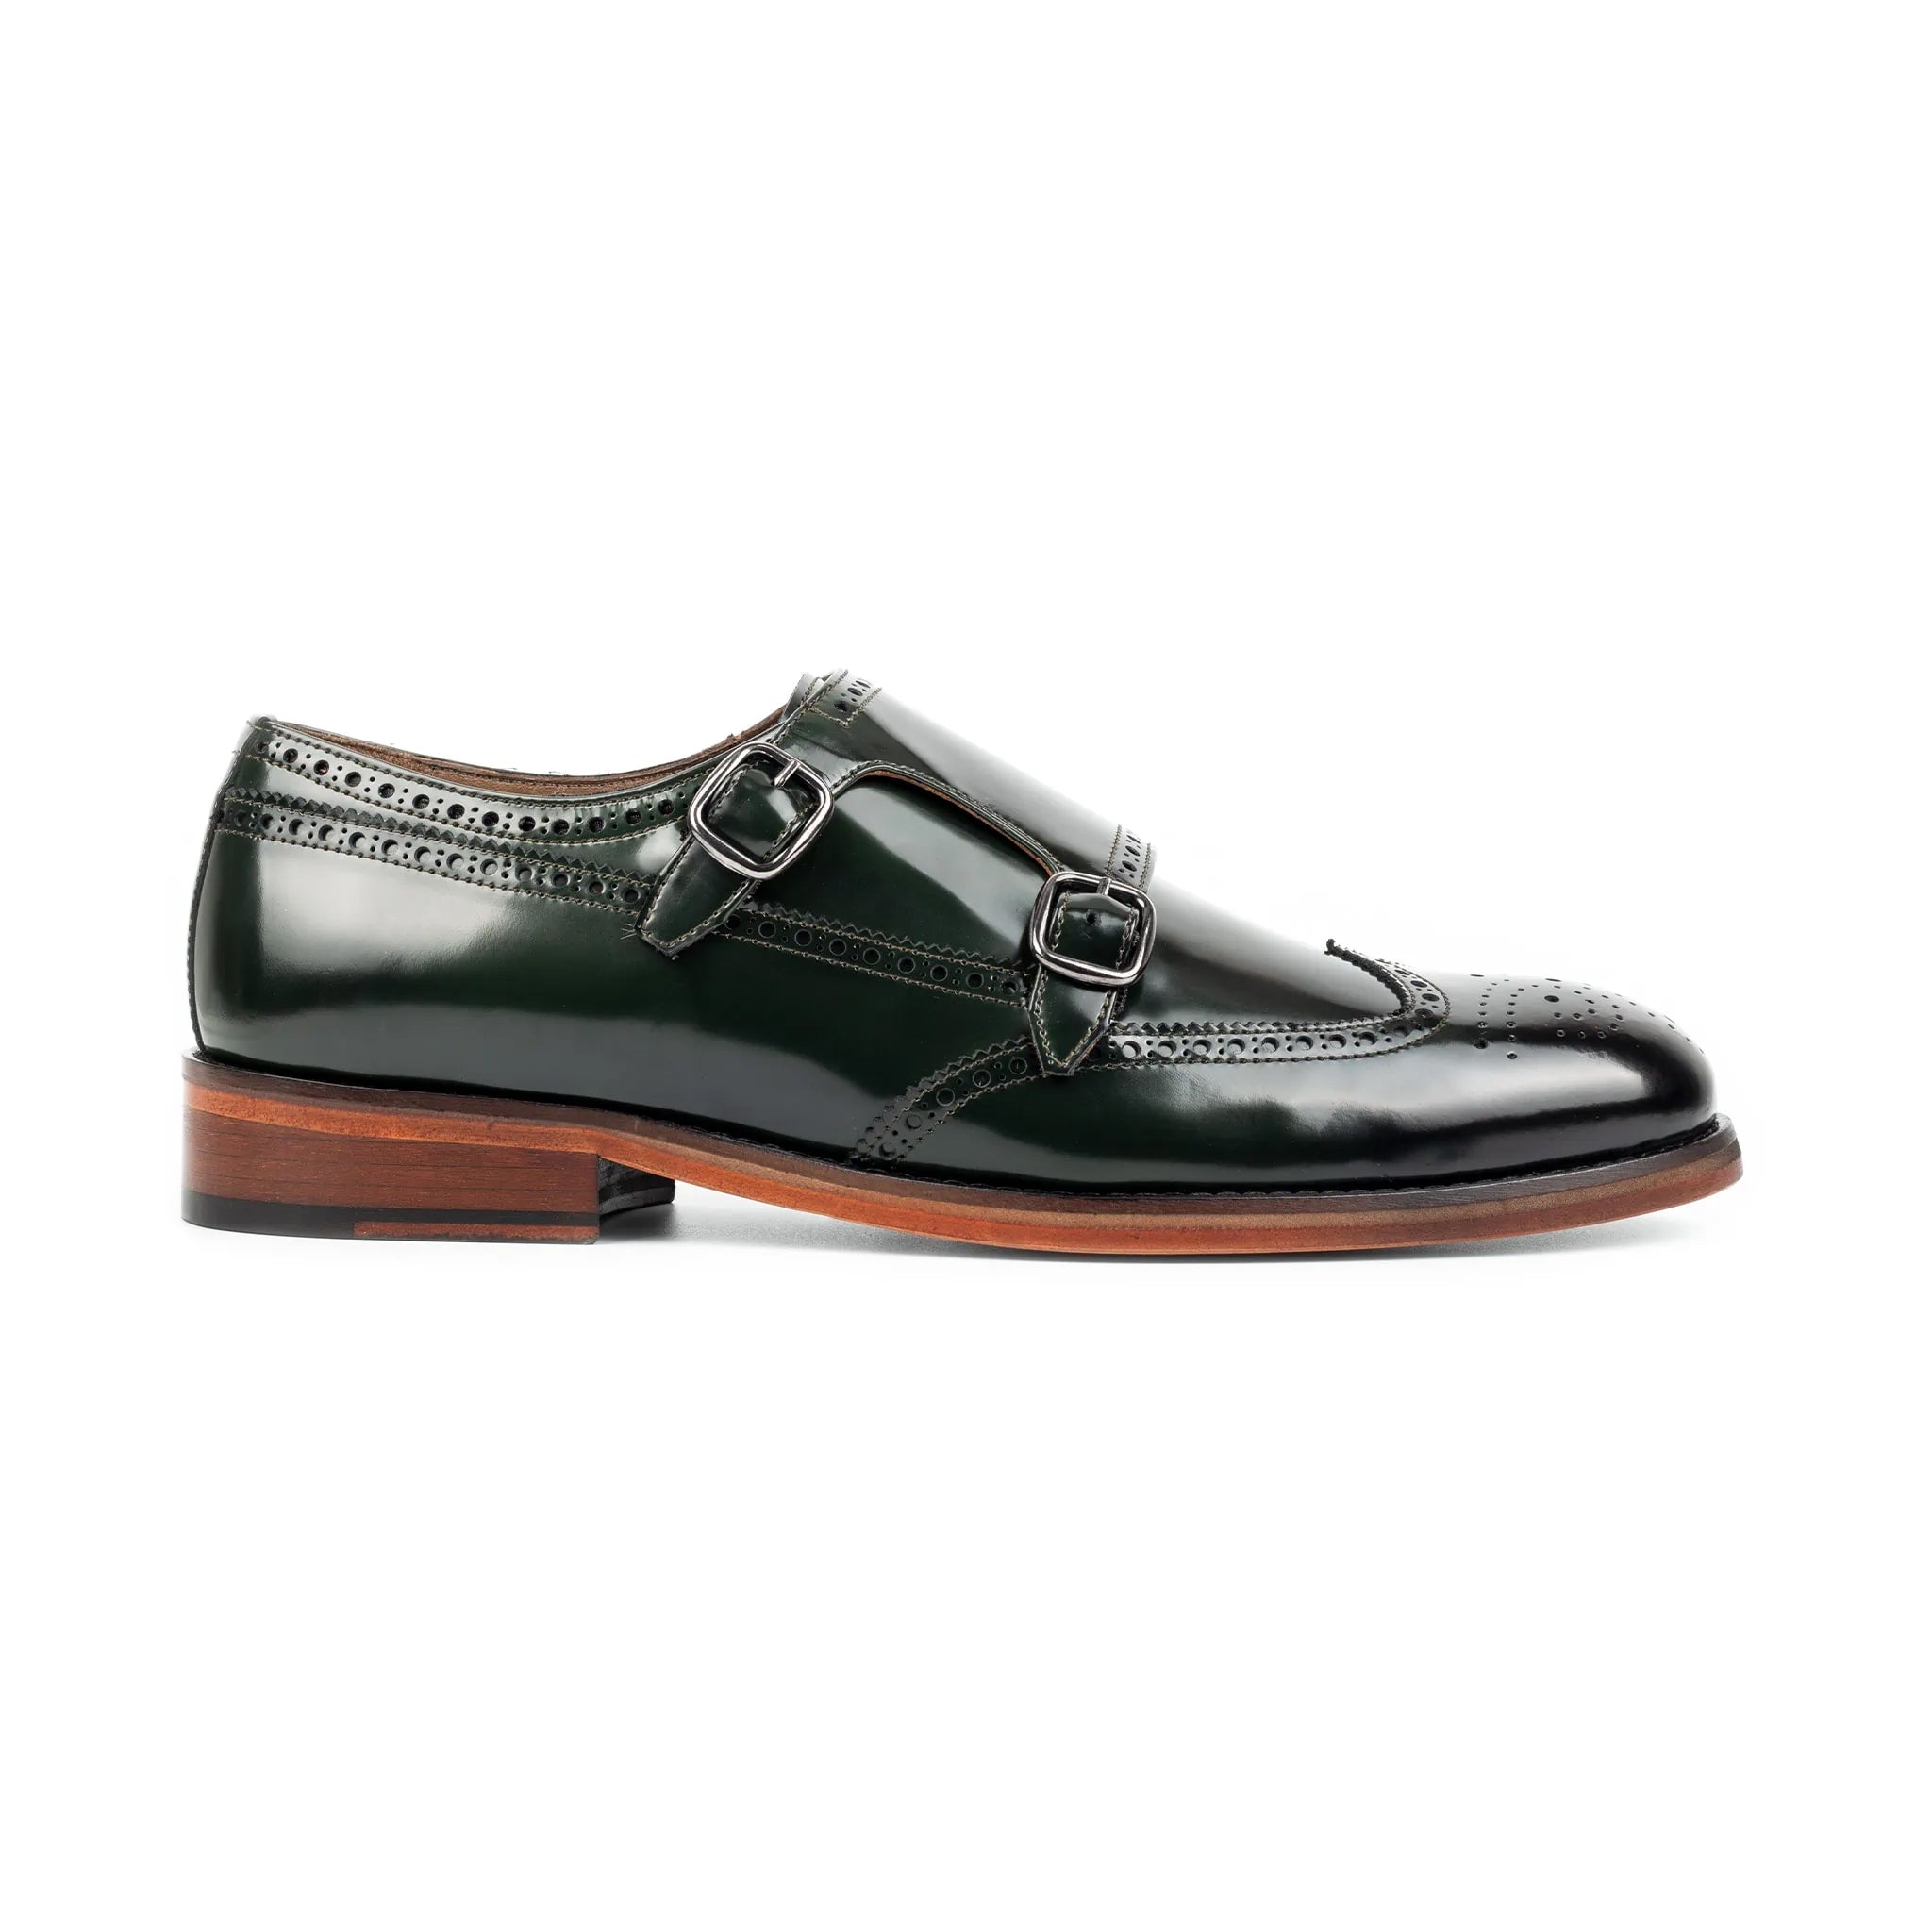 Coal Handcrafted Double Monk Strap Men's Shoes